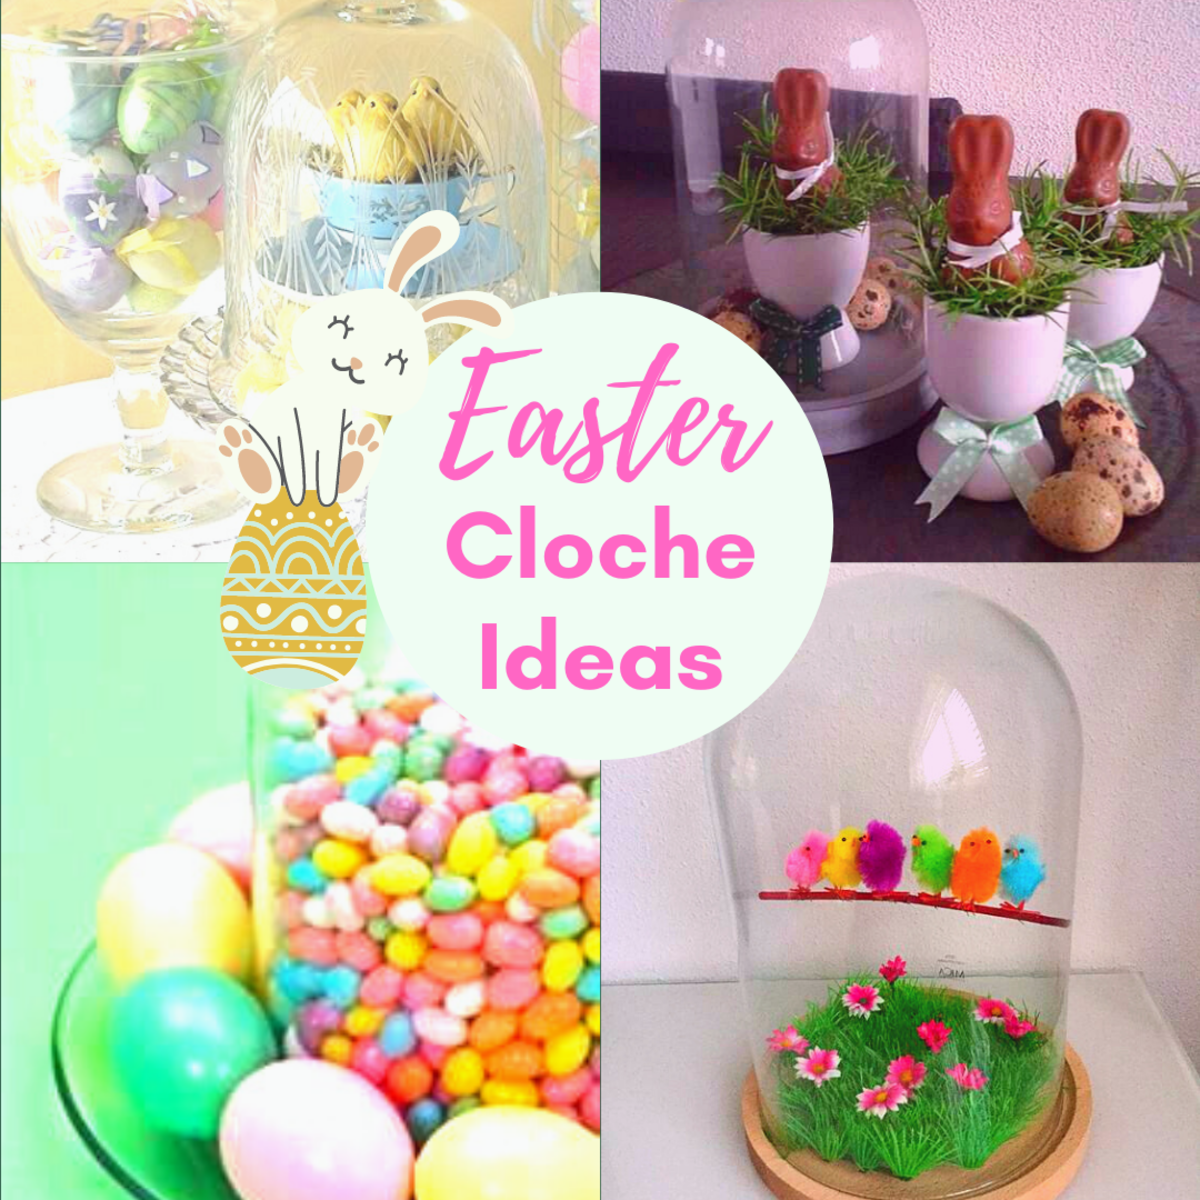 40+ Adorable Easter Cloche Ideas that Every Bunny will Love